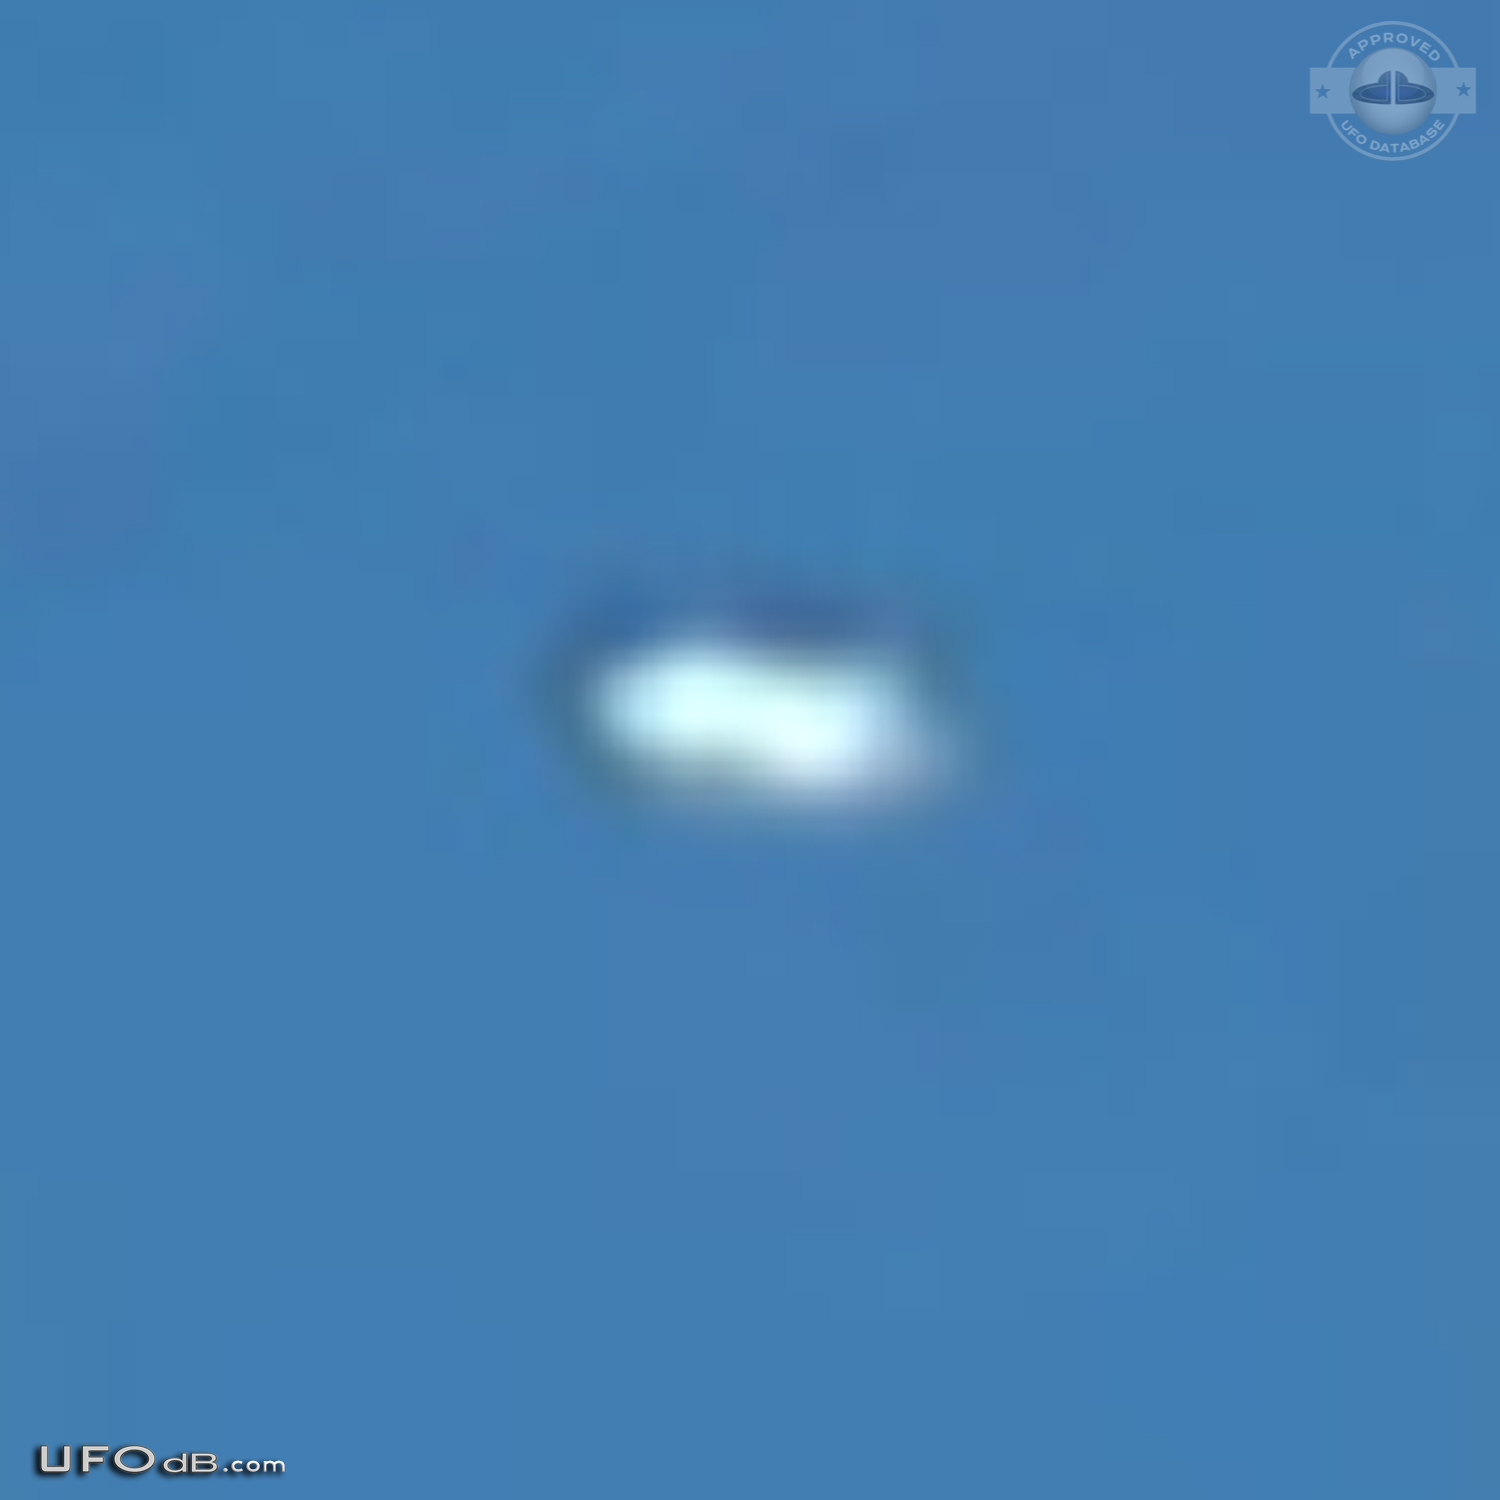 Cylindrical Saucer UFO caught on picture over Oland, Sweden in 2008 UFO Picture #453-4